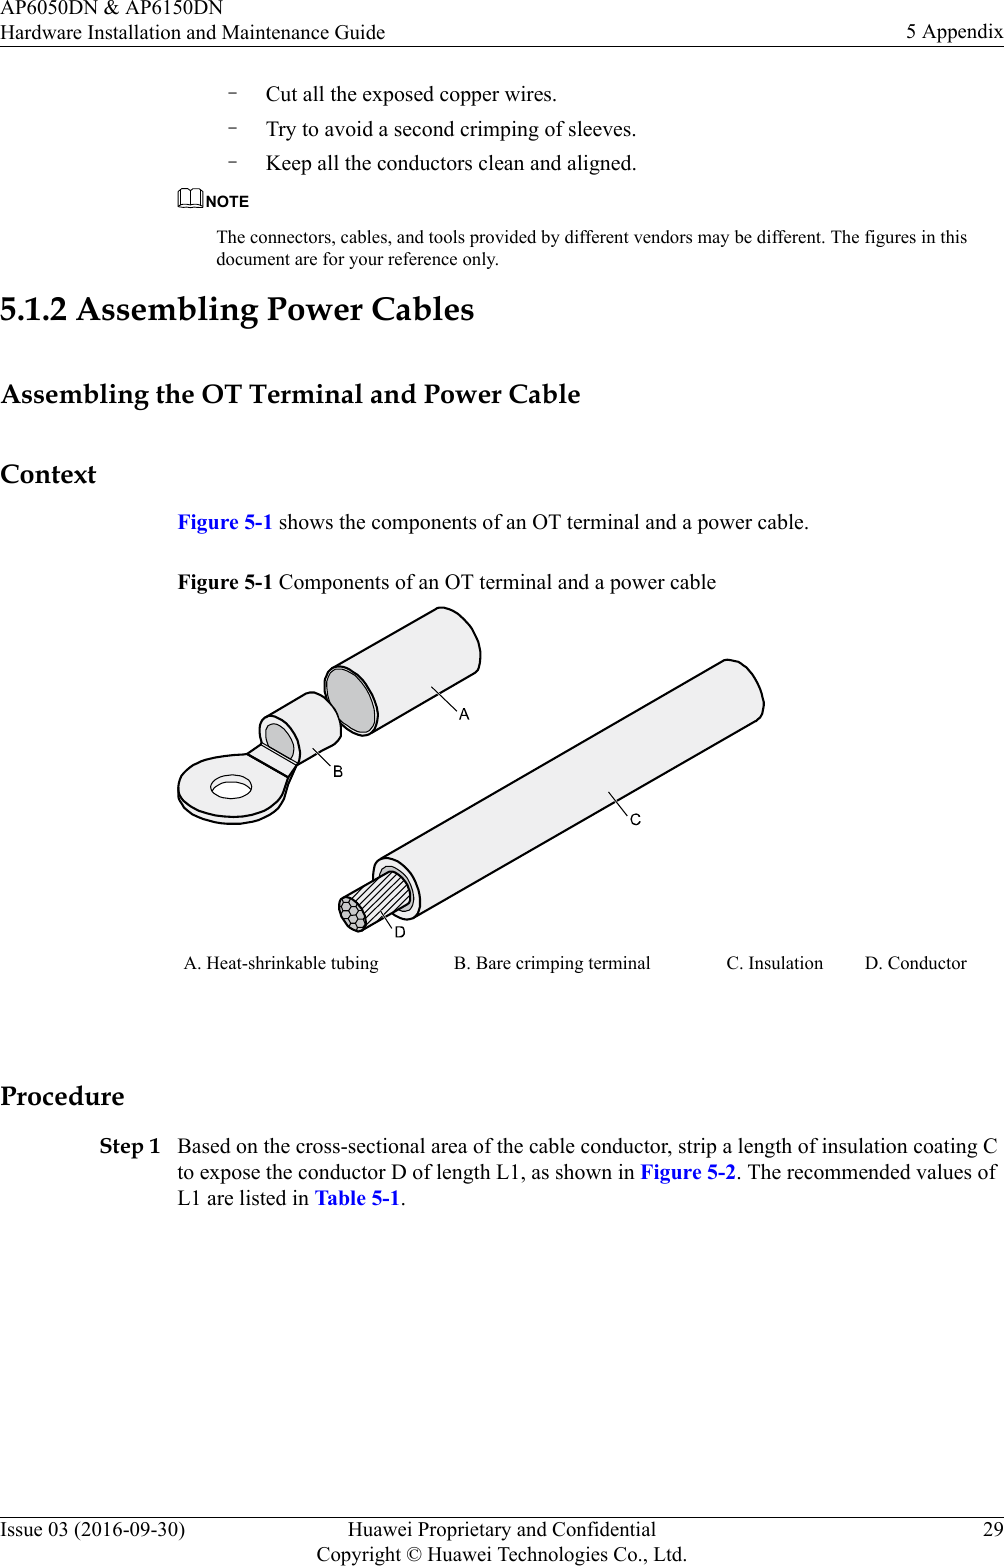 –Cut all the exposed copper wires.–Try to avoid a second crimping of sleeves.–Keep all the conductors clean and aligned.NOTEThe connectors, cables, and tools provided by different vendors may be different. The figures in thisdocument are for your reference only.5.1.2 Assembling Power CablesAssembling the OT Terminal and Power CableContextFigure 5-1 shows the components of an OT terminal and a power cable.Figure 5-1 Components of an OT terminal and a power cableA. Heat-shrinkable tubing B. Bare crimping terminal C. Insulation D. Conductor ProcedureStep 1 Based on the cross-sectional area of the cable conductor, strip a length of insulation coating Cto expose the conductor D of length L1, as shown in Figure 5-2. The recommended values ofL1 are listed in Table 5-1.AP6050DN &amp; AP6150DNHardware Installation and Maintenance Guide 5 AppendixIssue 03 (2016-09-30) Huawei Proprietary and ConfidentialCopyright © Huawei Technologies Co., Ltd.29